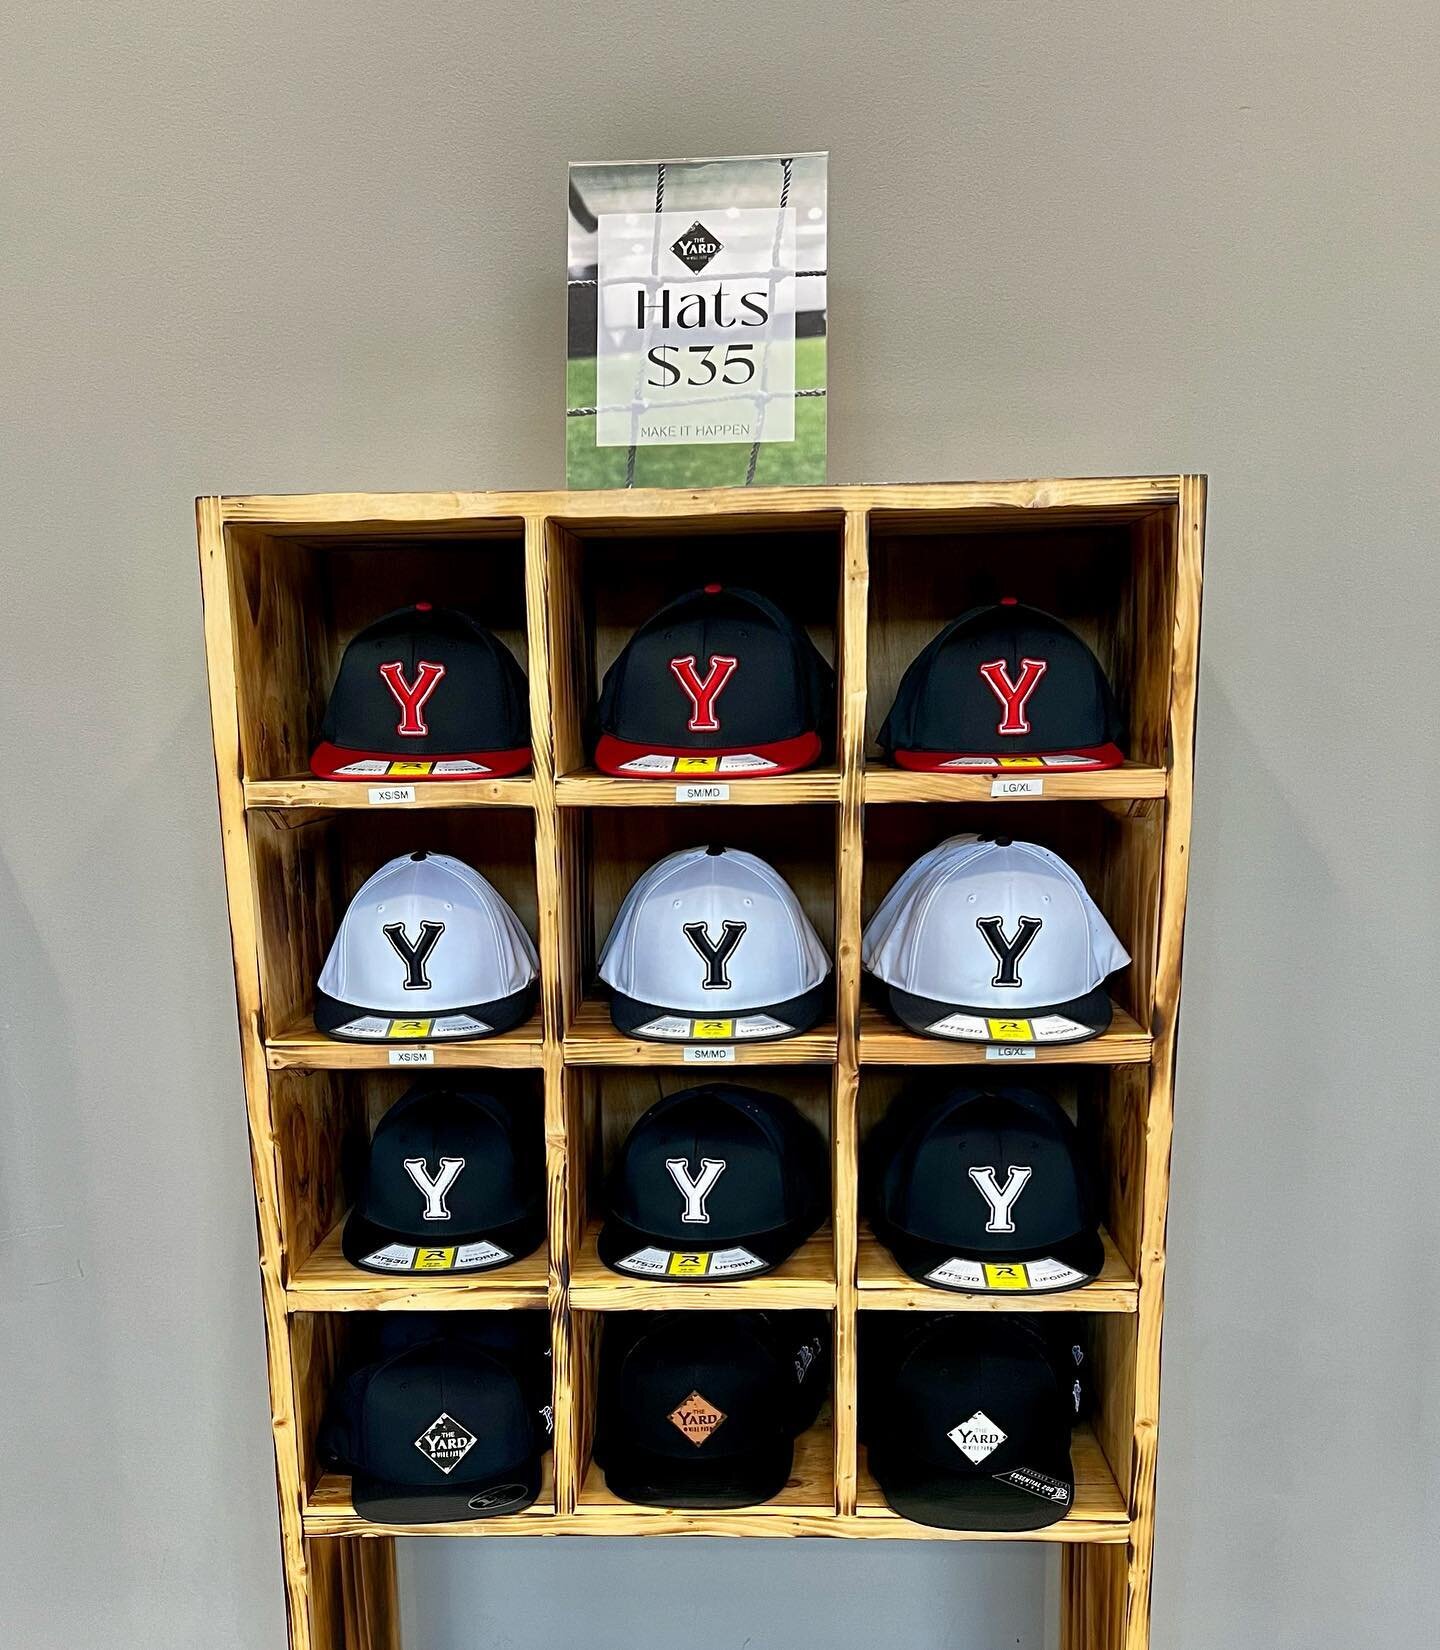 🔥🚨NEW HATS 🚨🔥

Come check out our new red &amp; black Richardson hats!! 

💥MAKE IT HAPPEN

#makeithappen #baseball #softball #athens #athensga #liveworkplay #oconeeco #watkinsvillega #theyard #theyardtraining #travelball #georgiabaseball #highsc